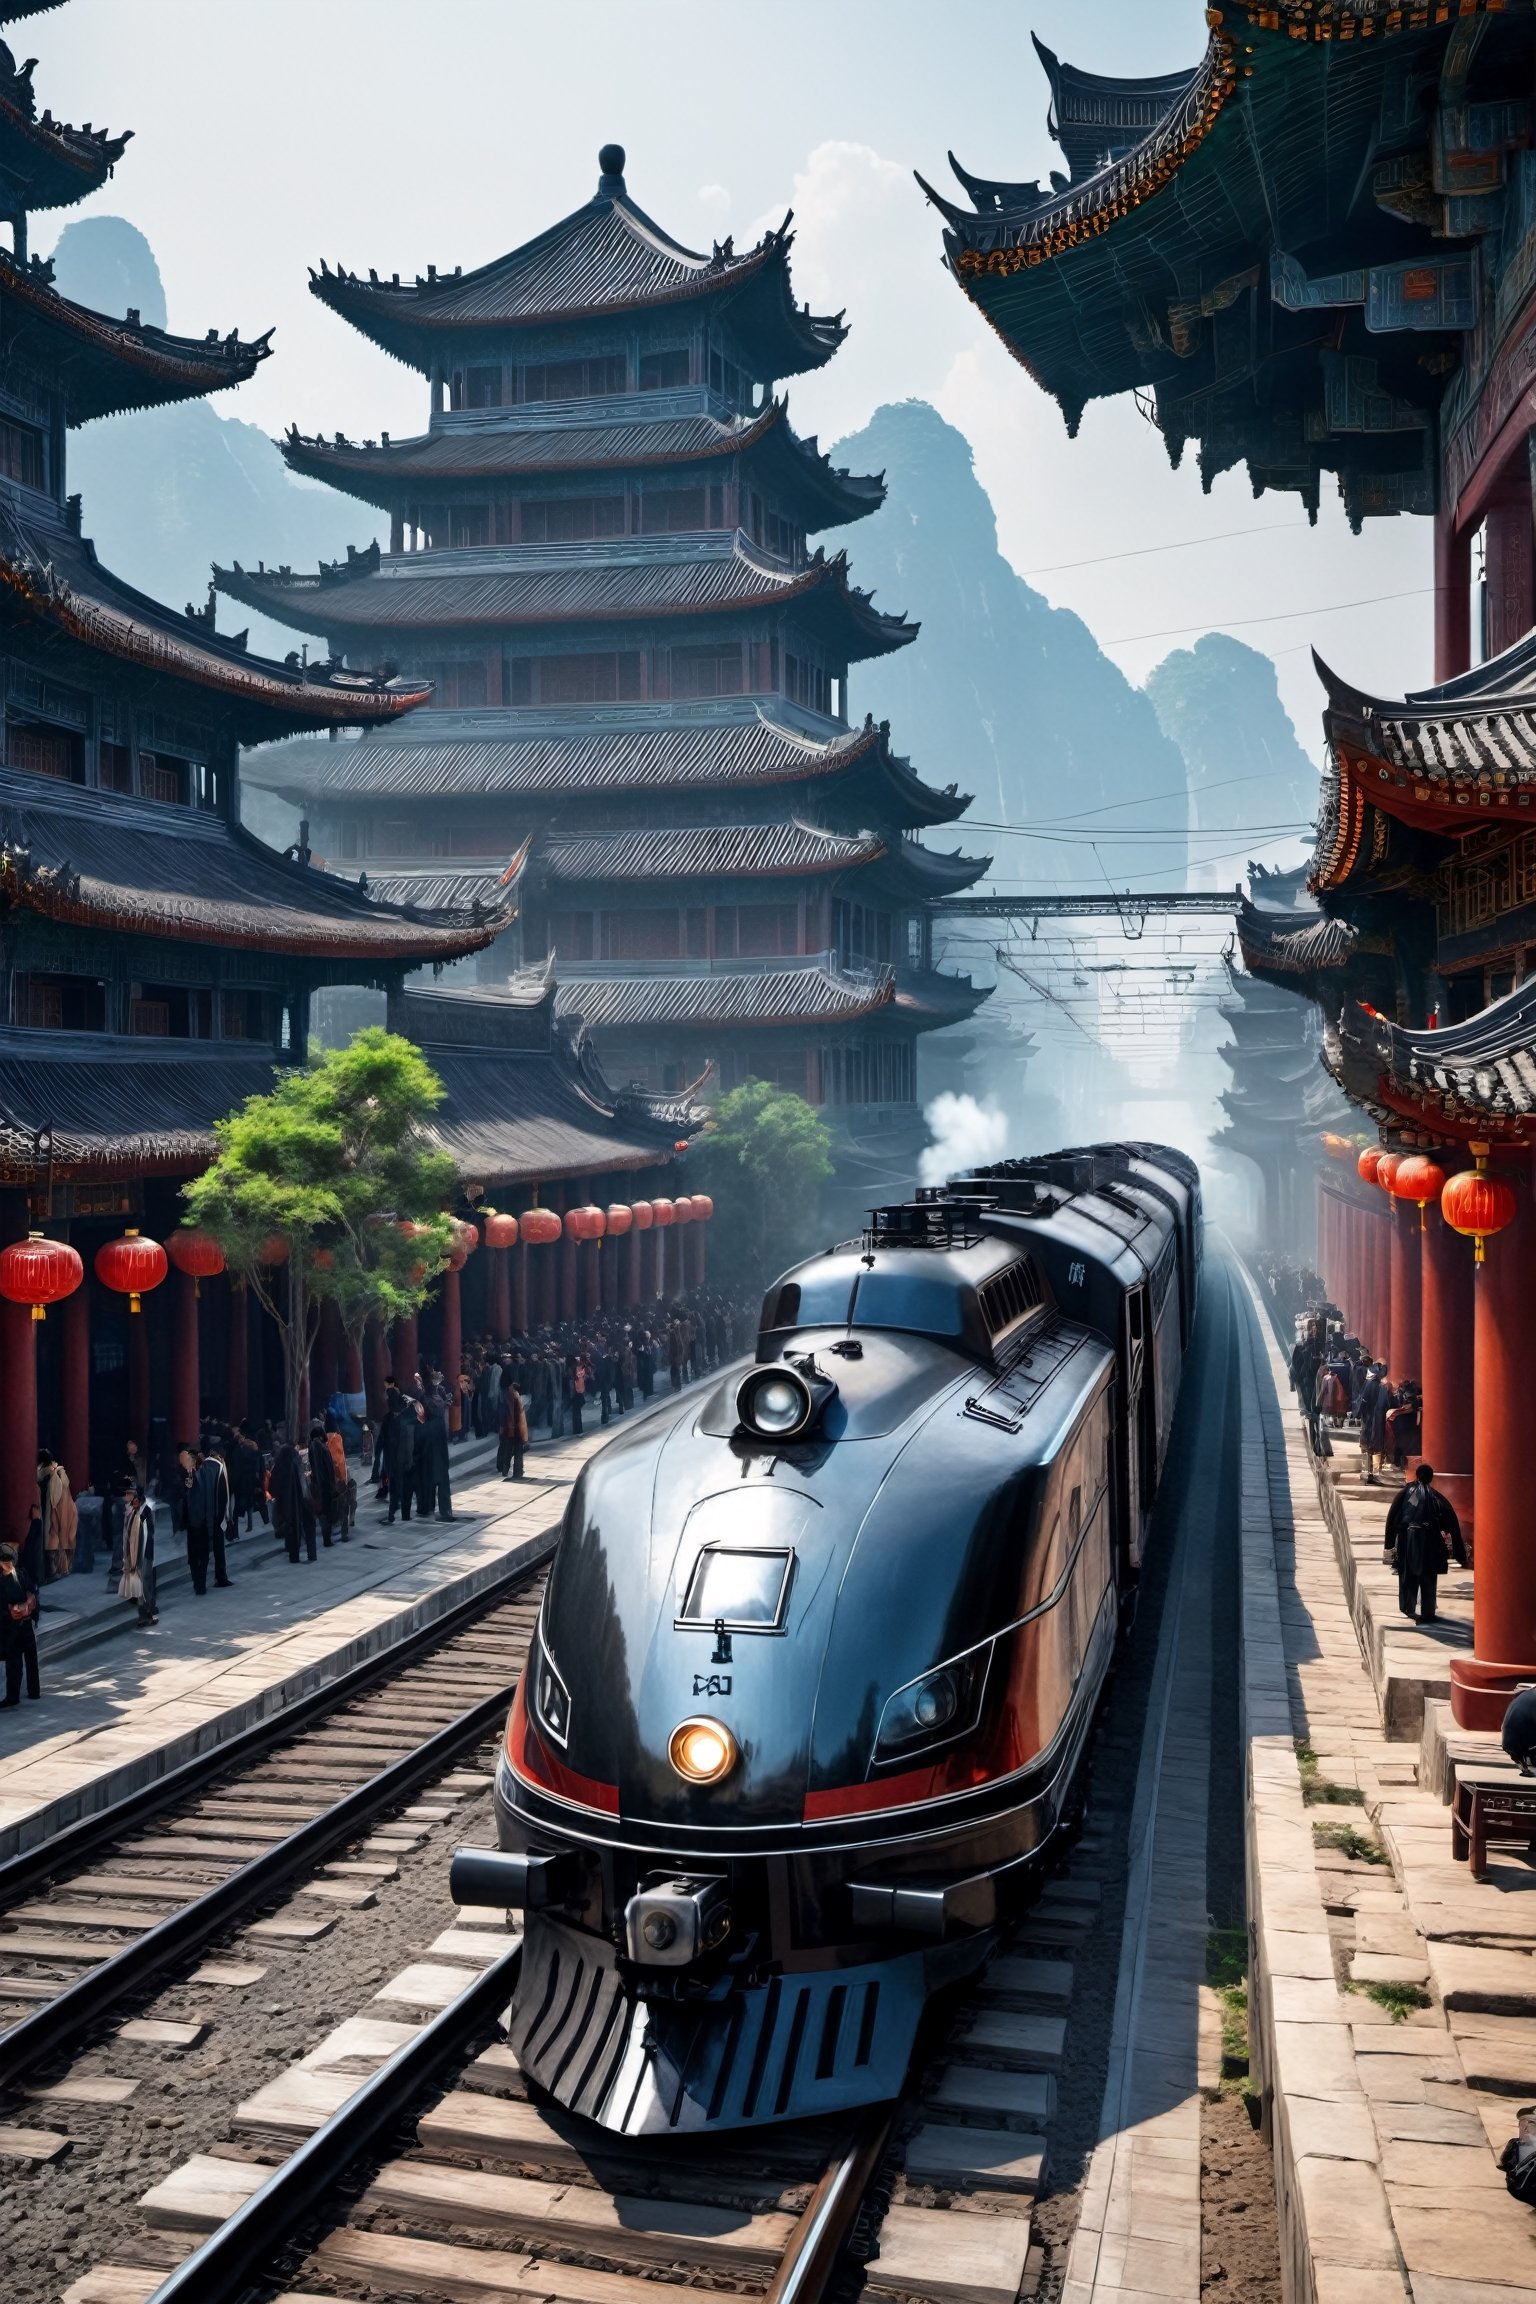 #McBane: A sci-fi train passing through an ancient Chinese city,people standing on railroad tracks, Highly realistic concept art, Steam engine, Highly detailed 4K 